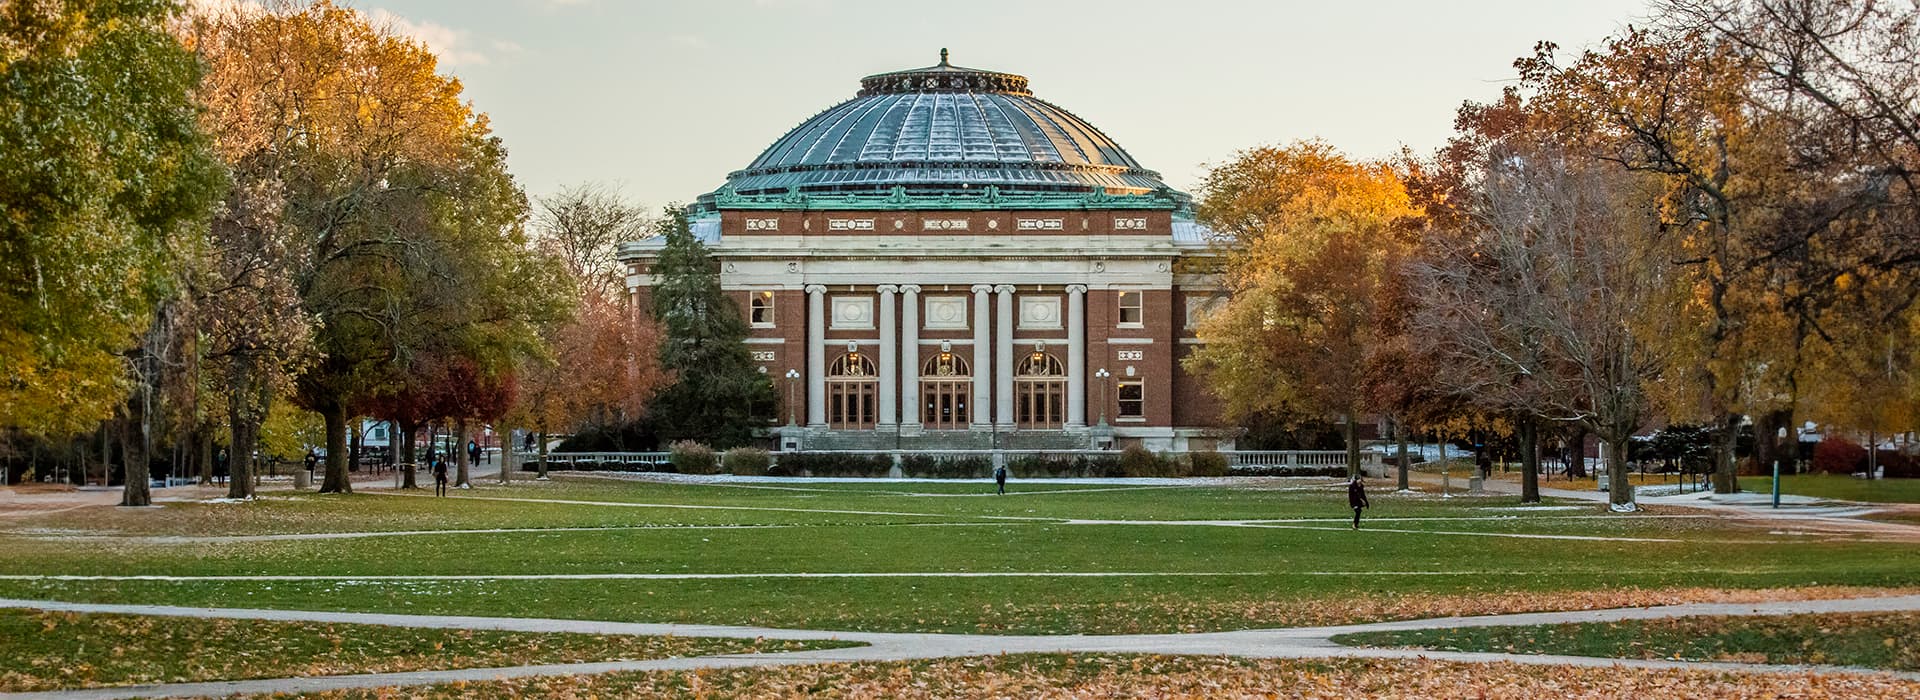 Foellinger Auditorium is located on the south end of the University of Illinois at Urbana-Champagin quad.